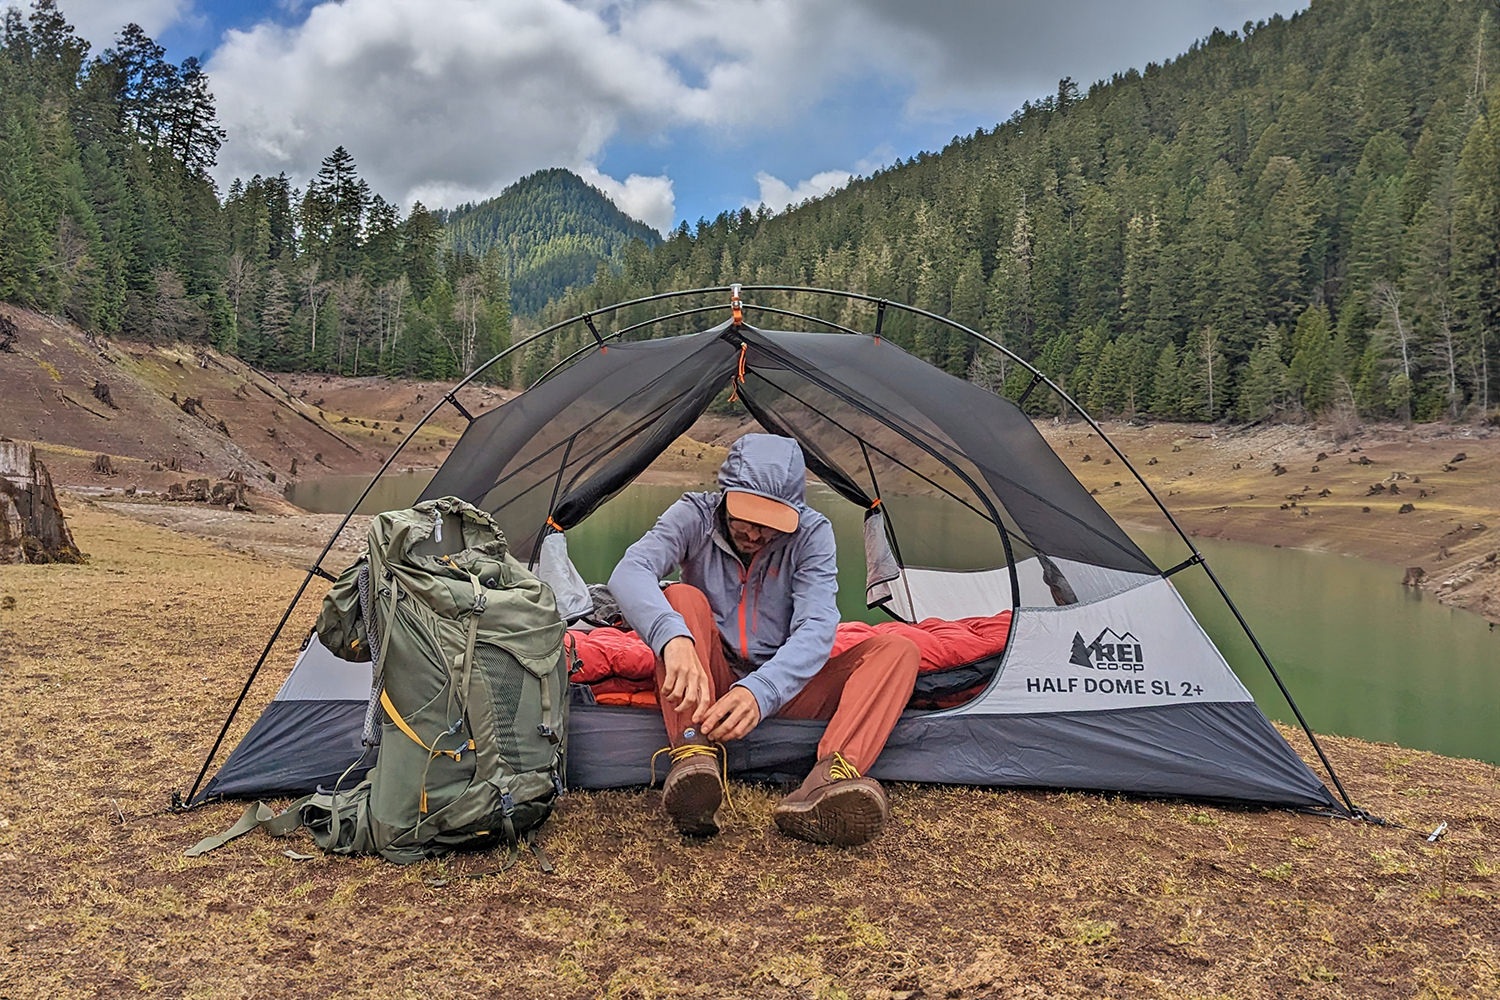 A hiker sitting in the doorway of the REI Half Dome SL 2+ backpacking tent with a tree-lined lake in the background